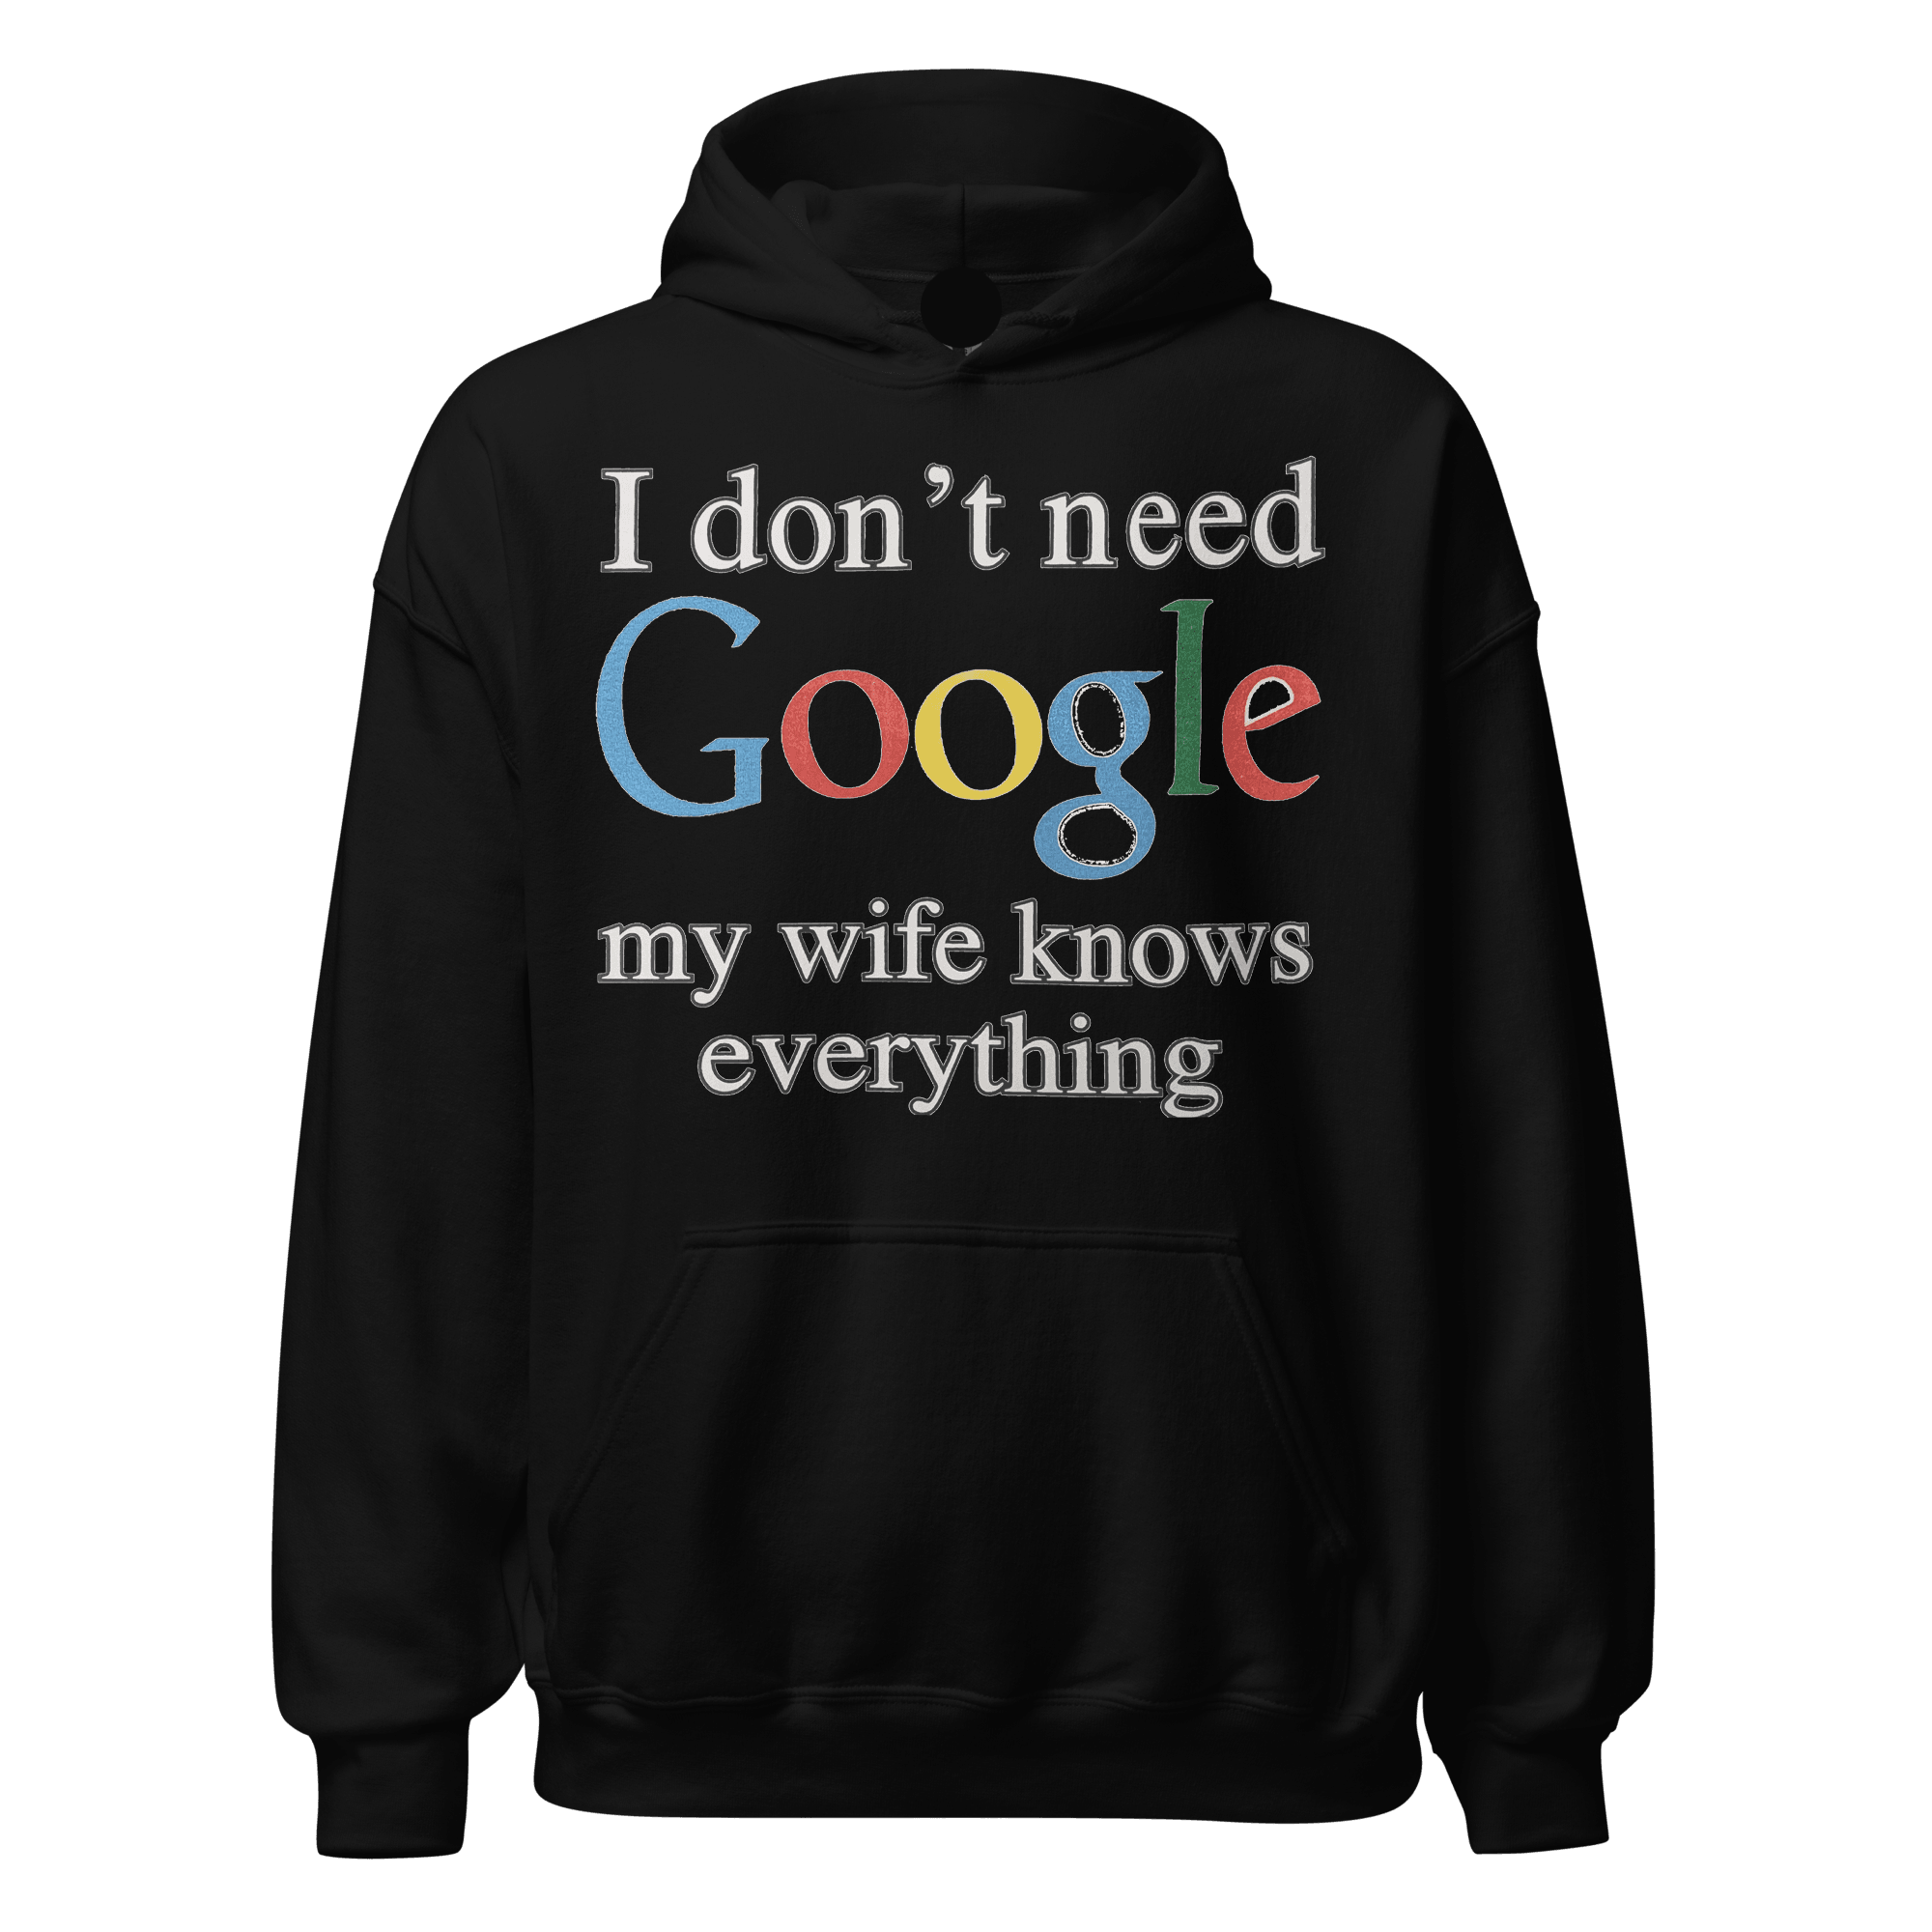 I Don't need Google My Wife/Husband Knows Everything Relationship Hoodie Set Ultra Soft Blended Cotton Midweight Pullover - TopKoalaTee